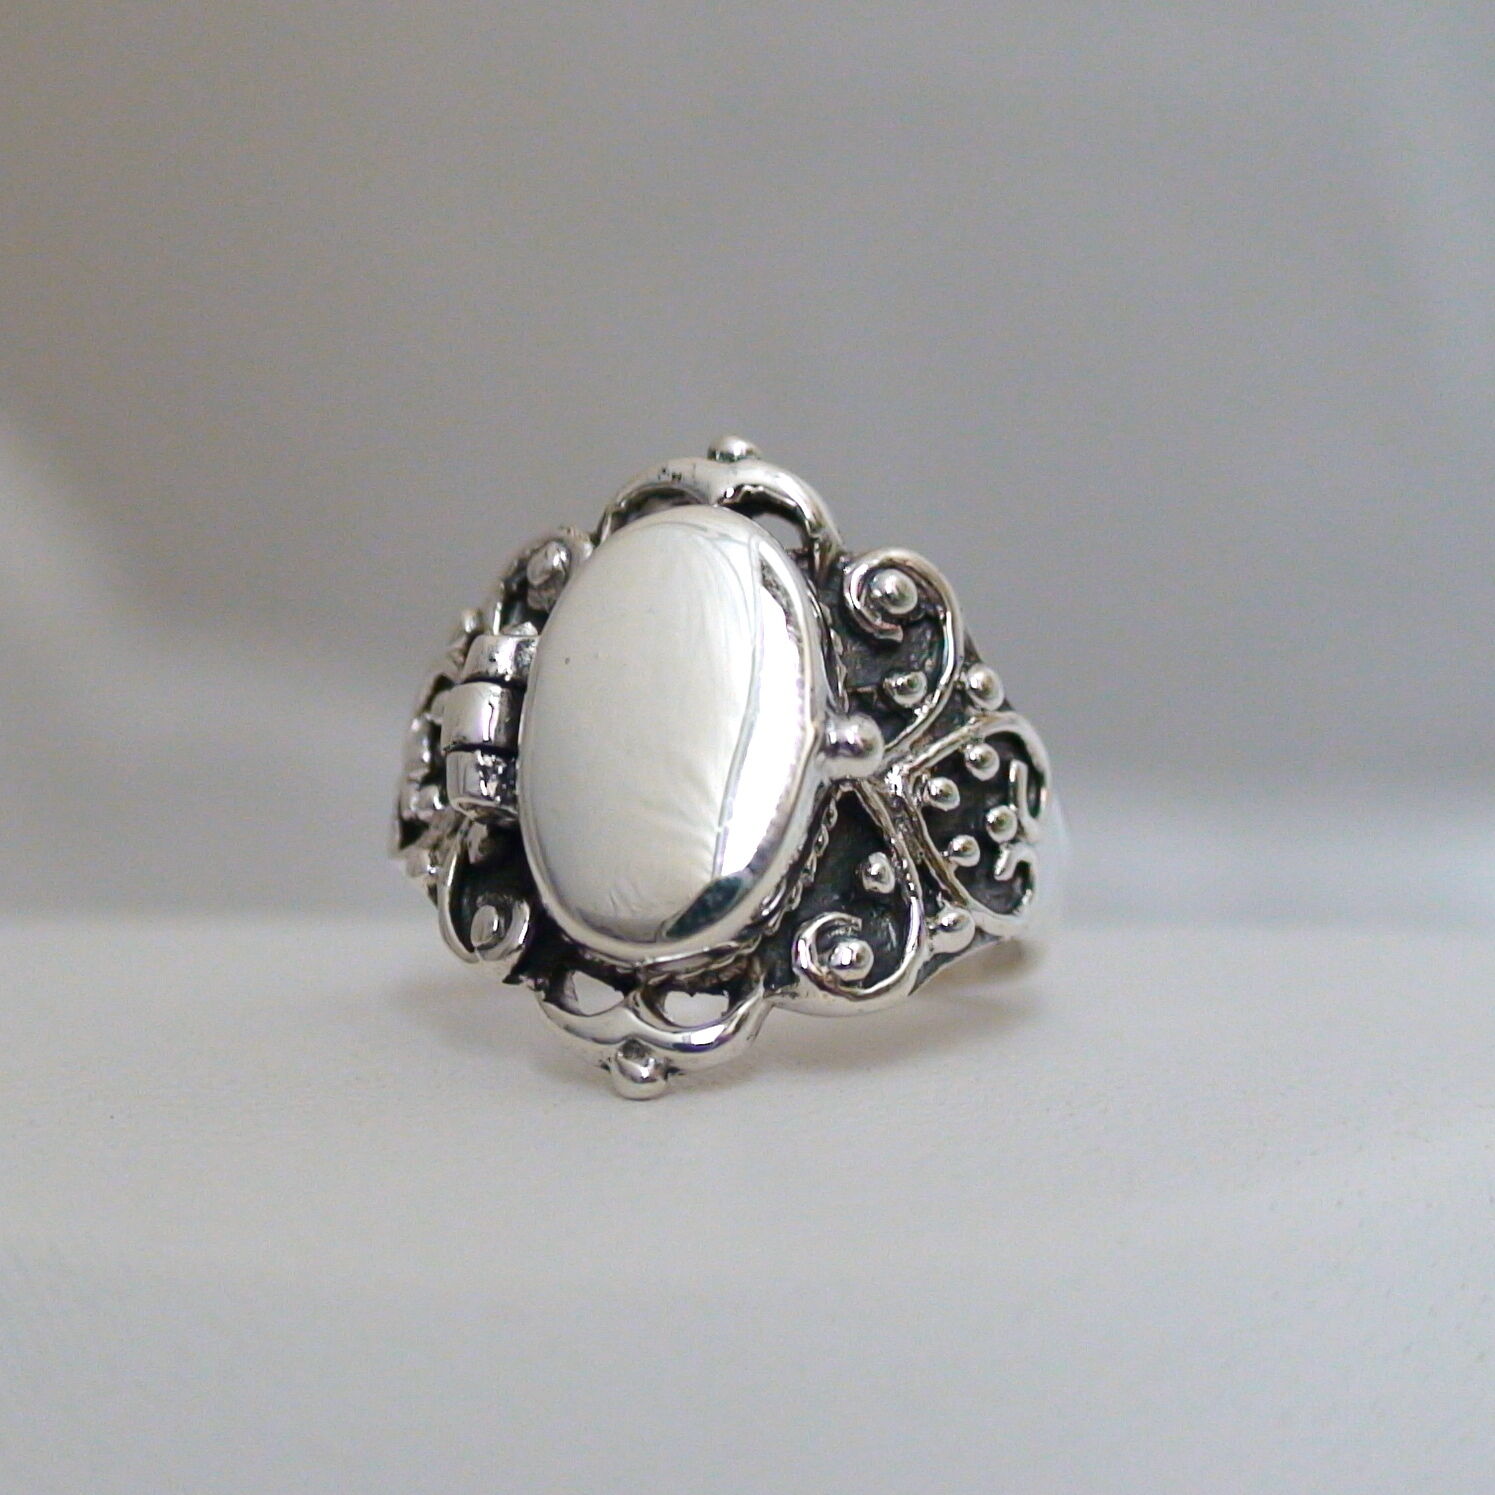 Victorian Scroll Poison Ring - 925 Sterling Silver, Sizes 6-10, Pillbox Ring New